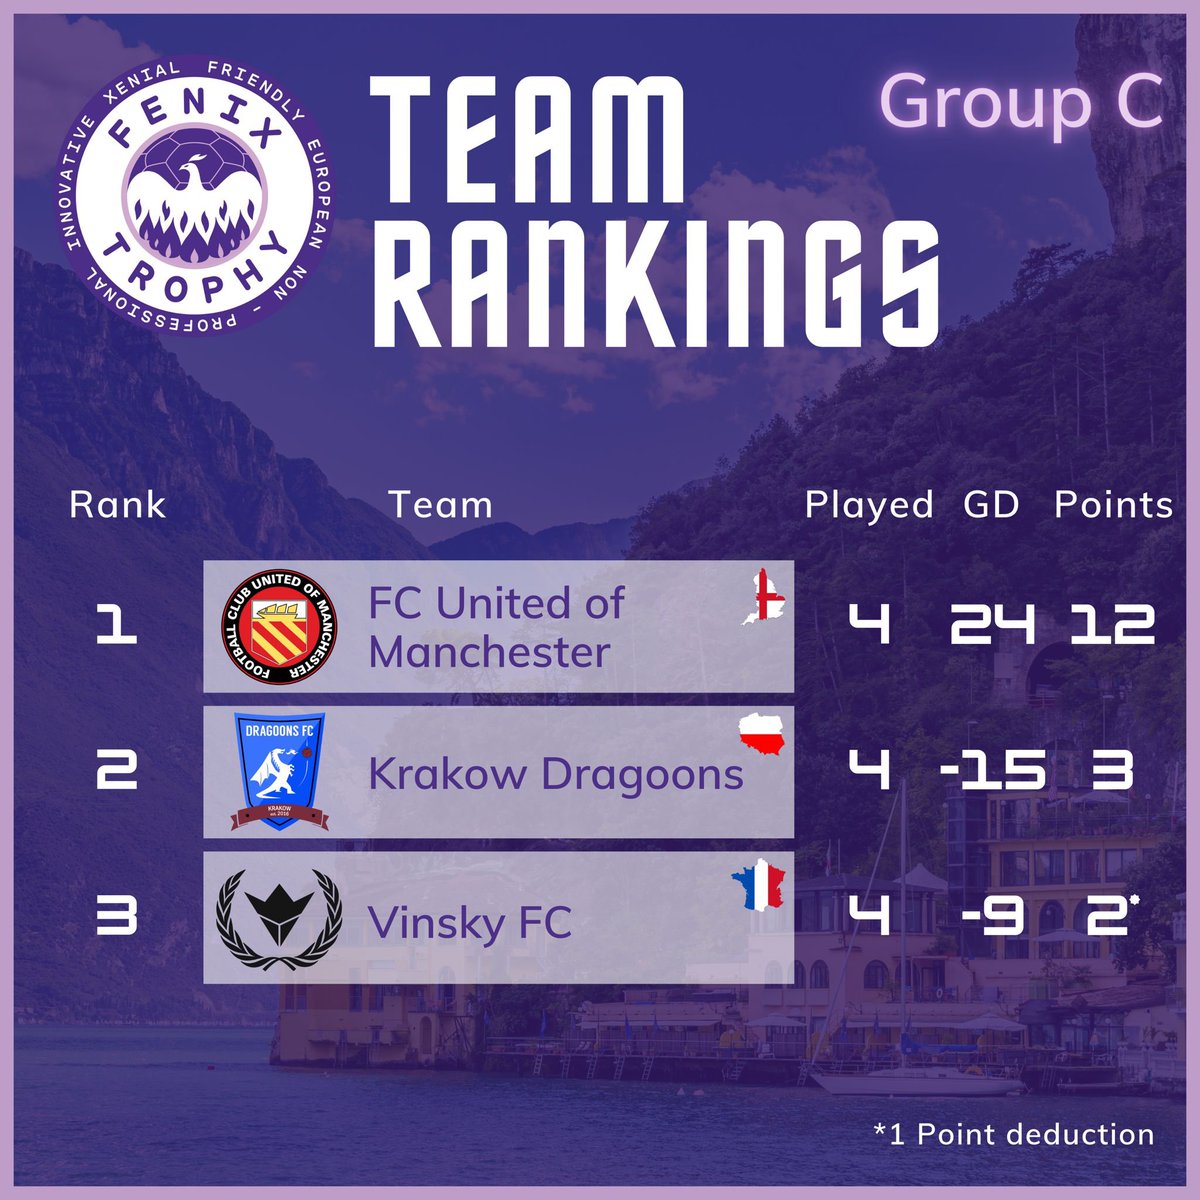 Official Communication Vinsky FC and KSK Beveren have been unable to provide the tournament organising committee with evidence they can fulfil their remaining group match, respectively against Krakow Dragoons and FC Oslo. The matches are therefore awarded 3-0 to Dragoons and